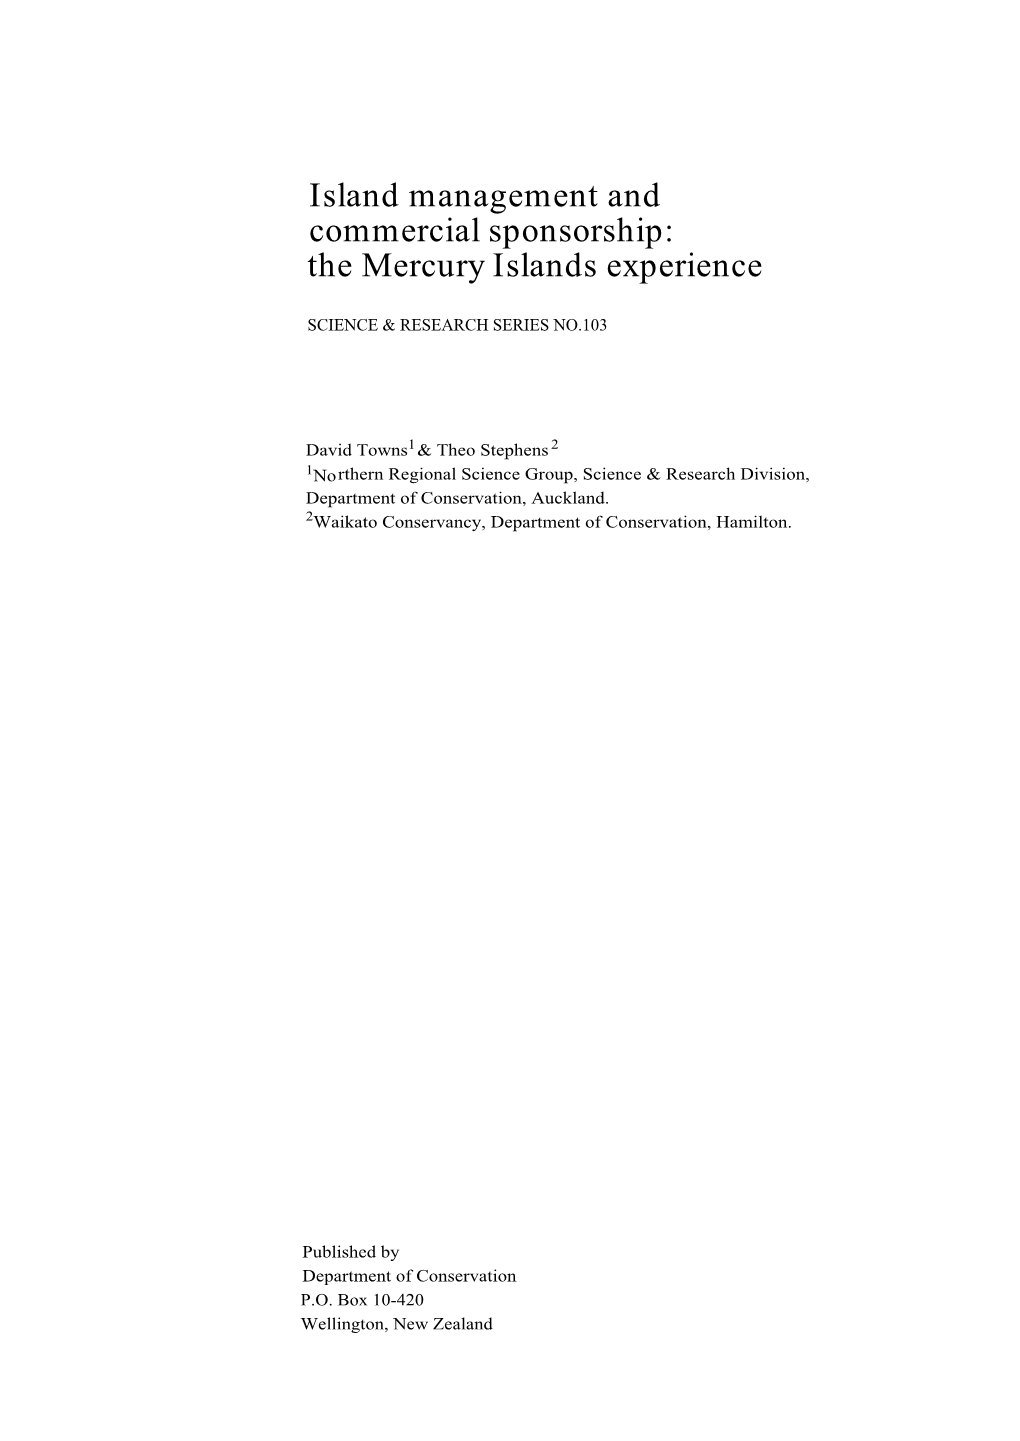 Island Management and Commercial Sponsorship: the Mercury Islands Experience